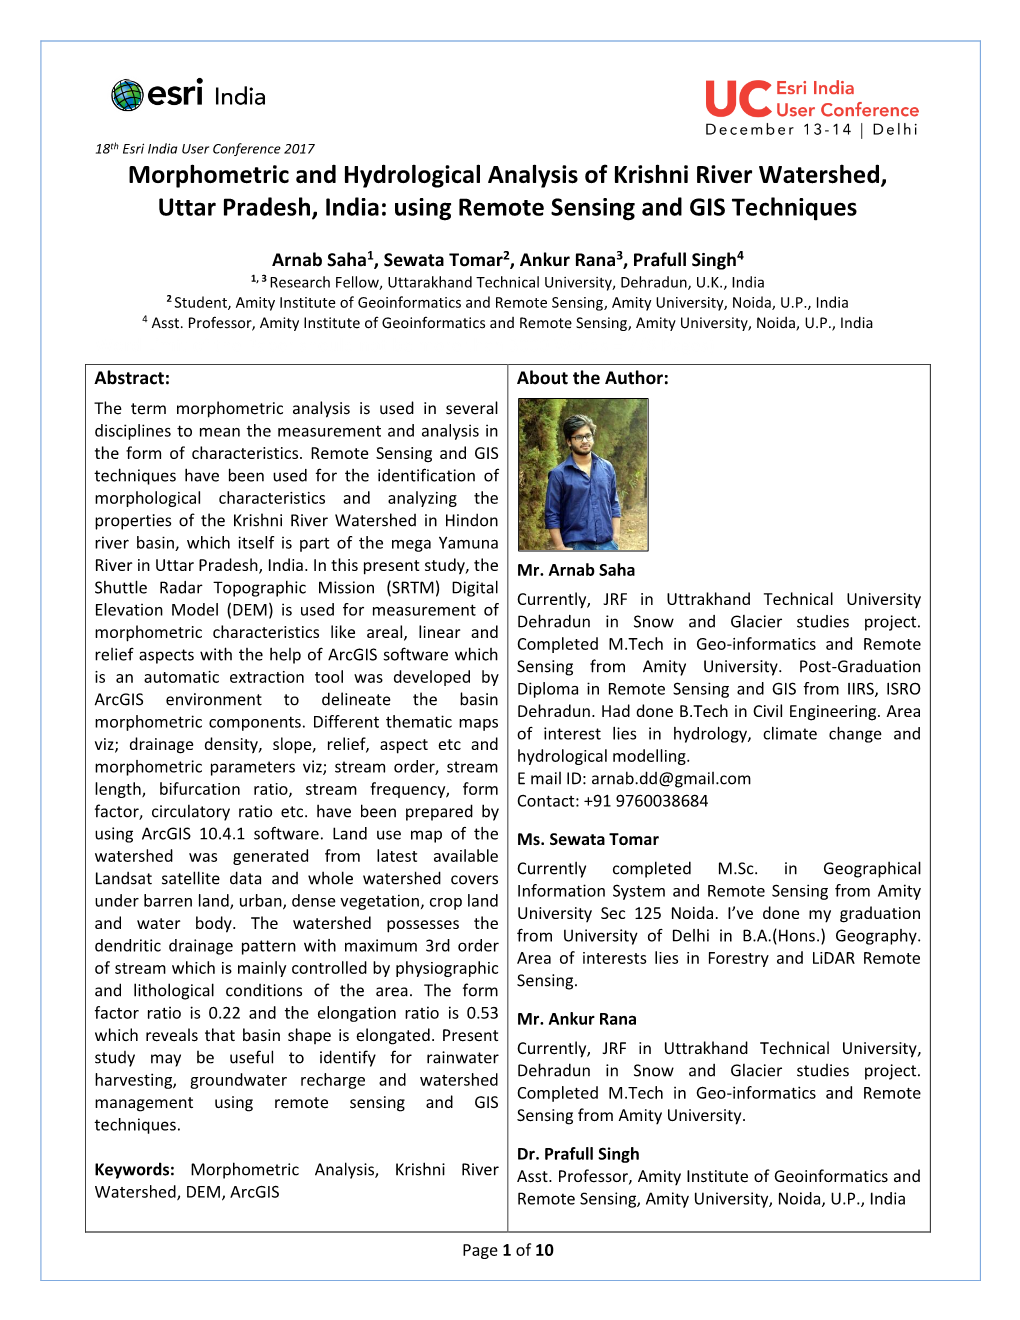 Morphometric and Hydrological Analysis of Krishni River Watershed, Uttar Pradesh, India: Using Remote Sensing and GIS Techniques